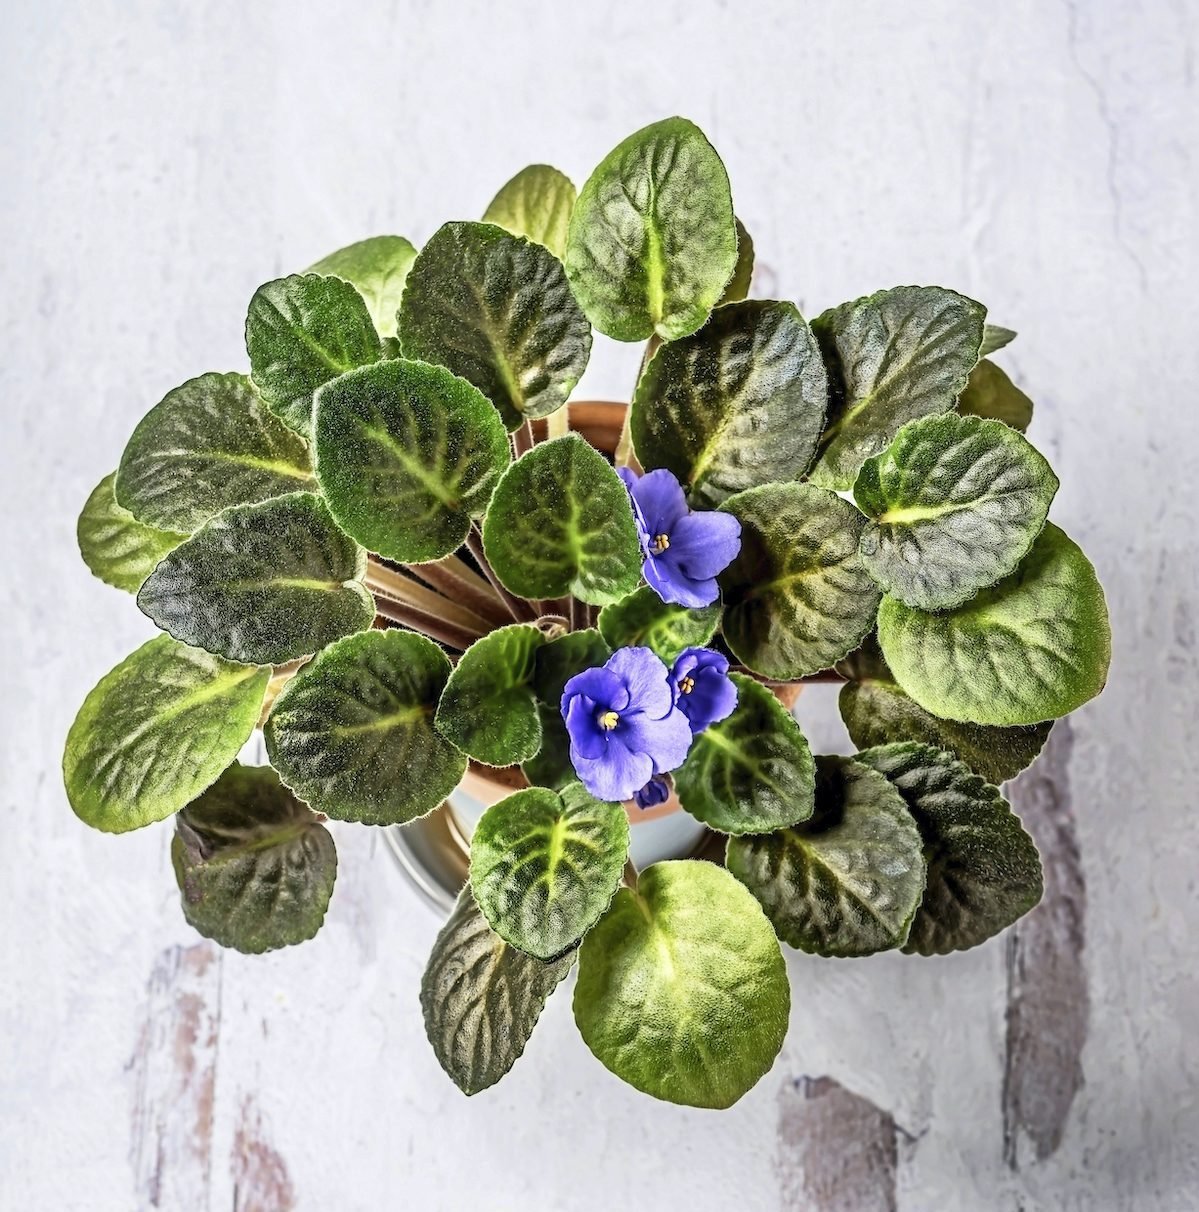 African Violet Care 101: Expert Growing Tips